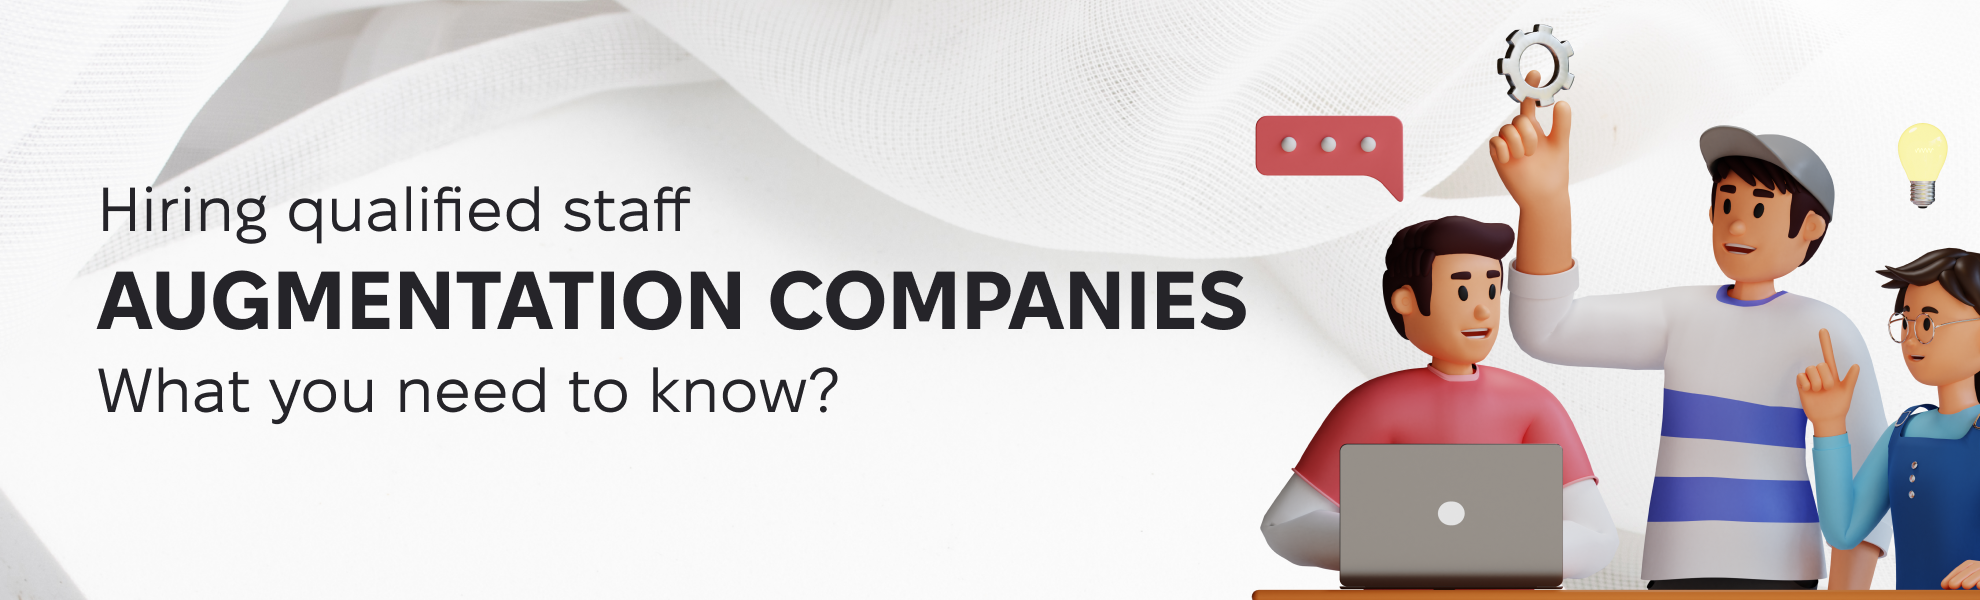 Hiring Qualified Staff Augmentation Companies | What You Need to Know